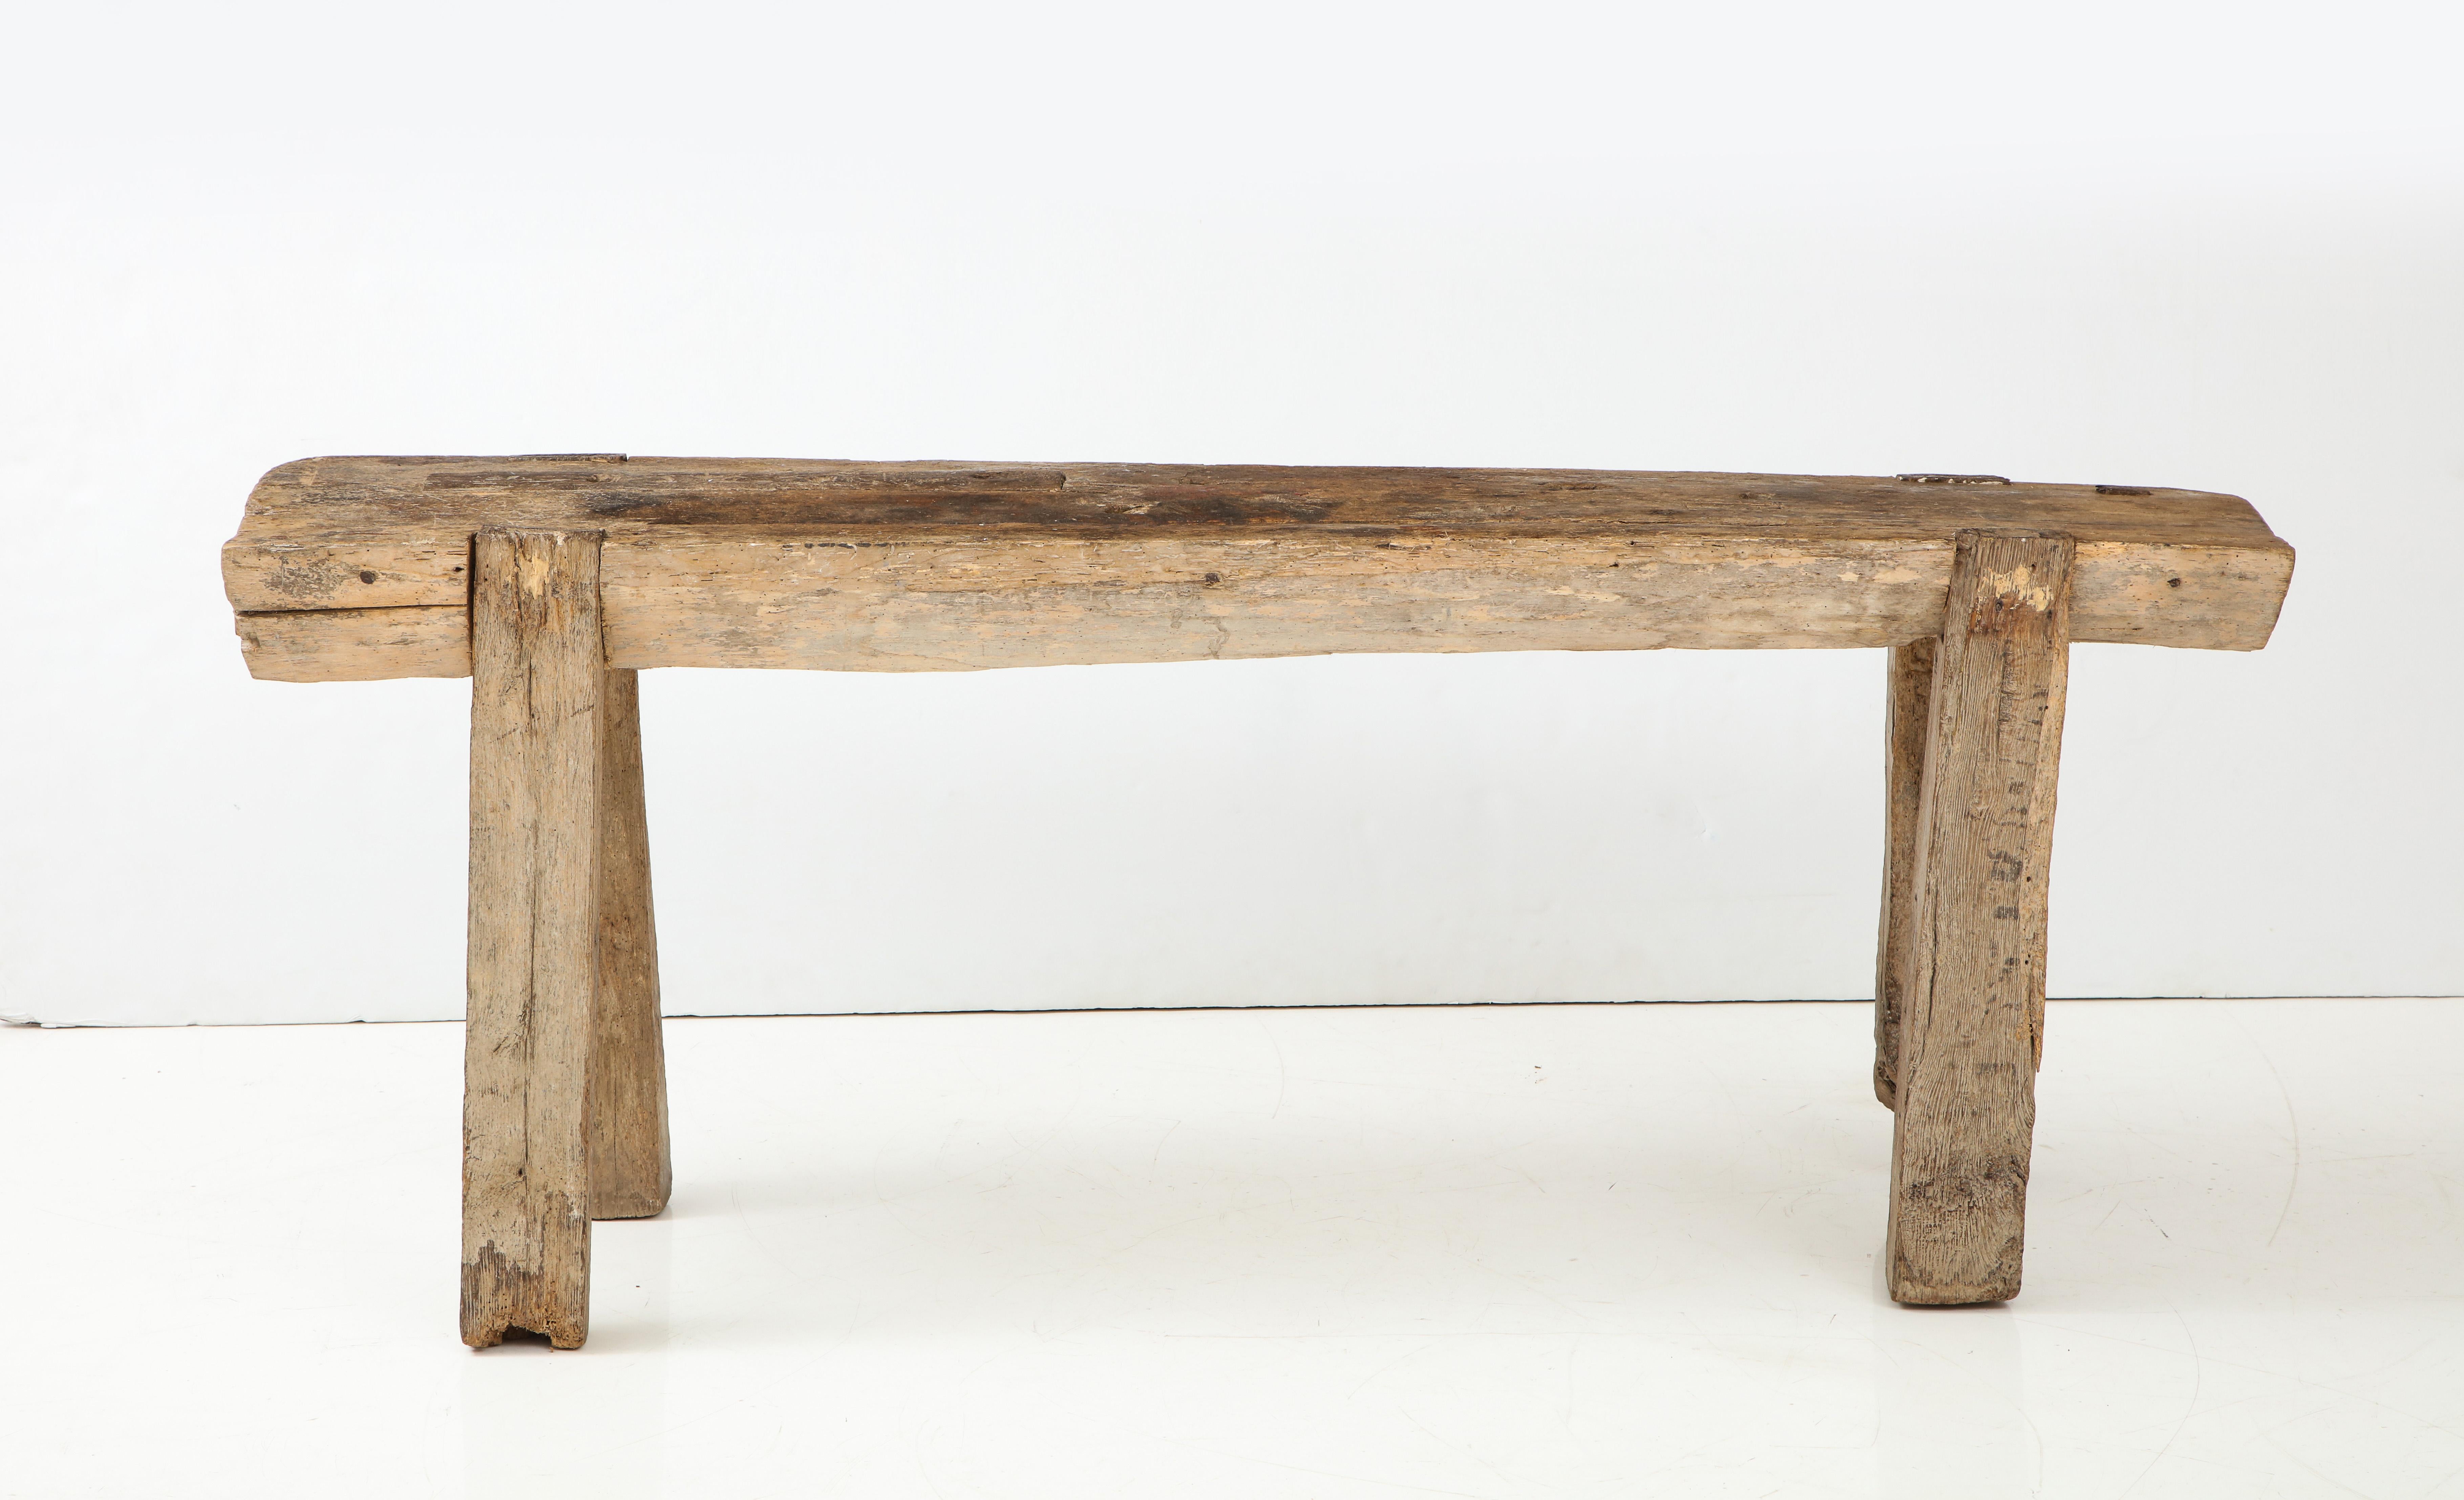 French Carpenters Workbench / Primitive console, circa 1900
Elm and forged iron

Beautiful animation in the legs
Great natural color and patina.